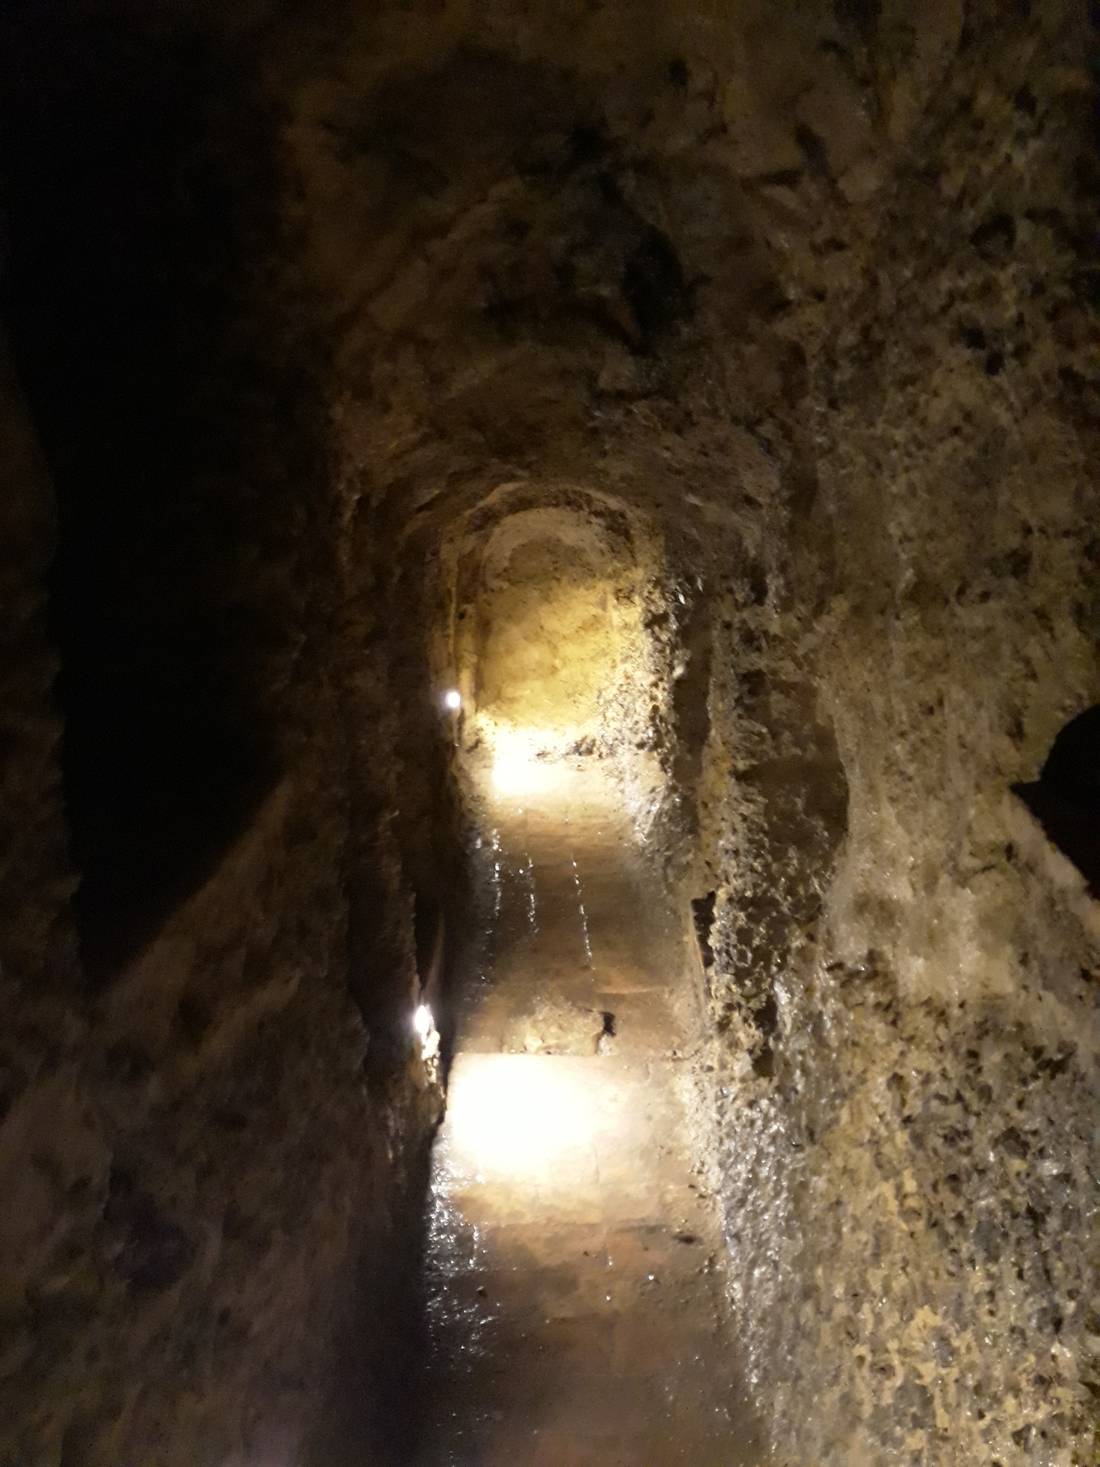 The tunnels connecting to the main well